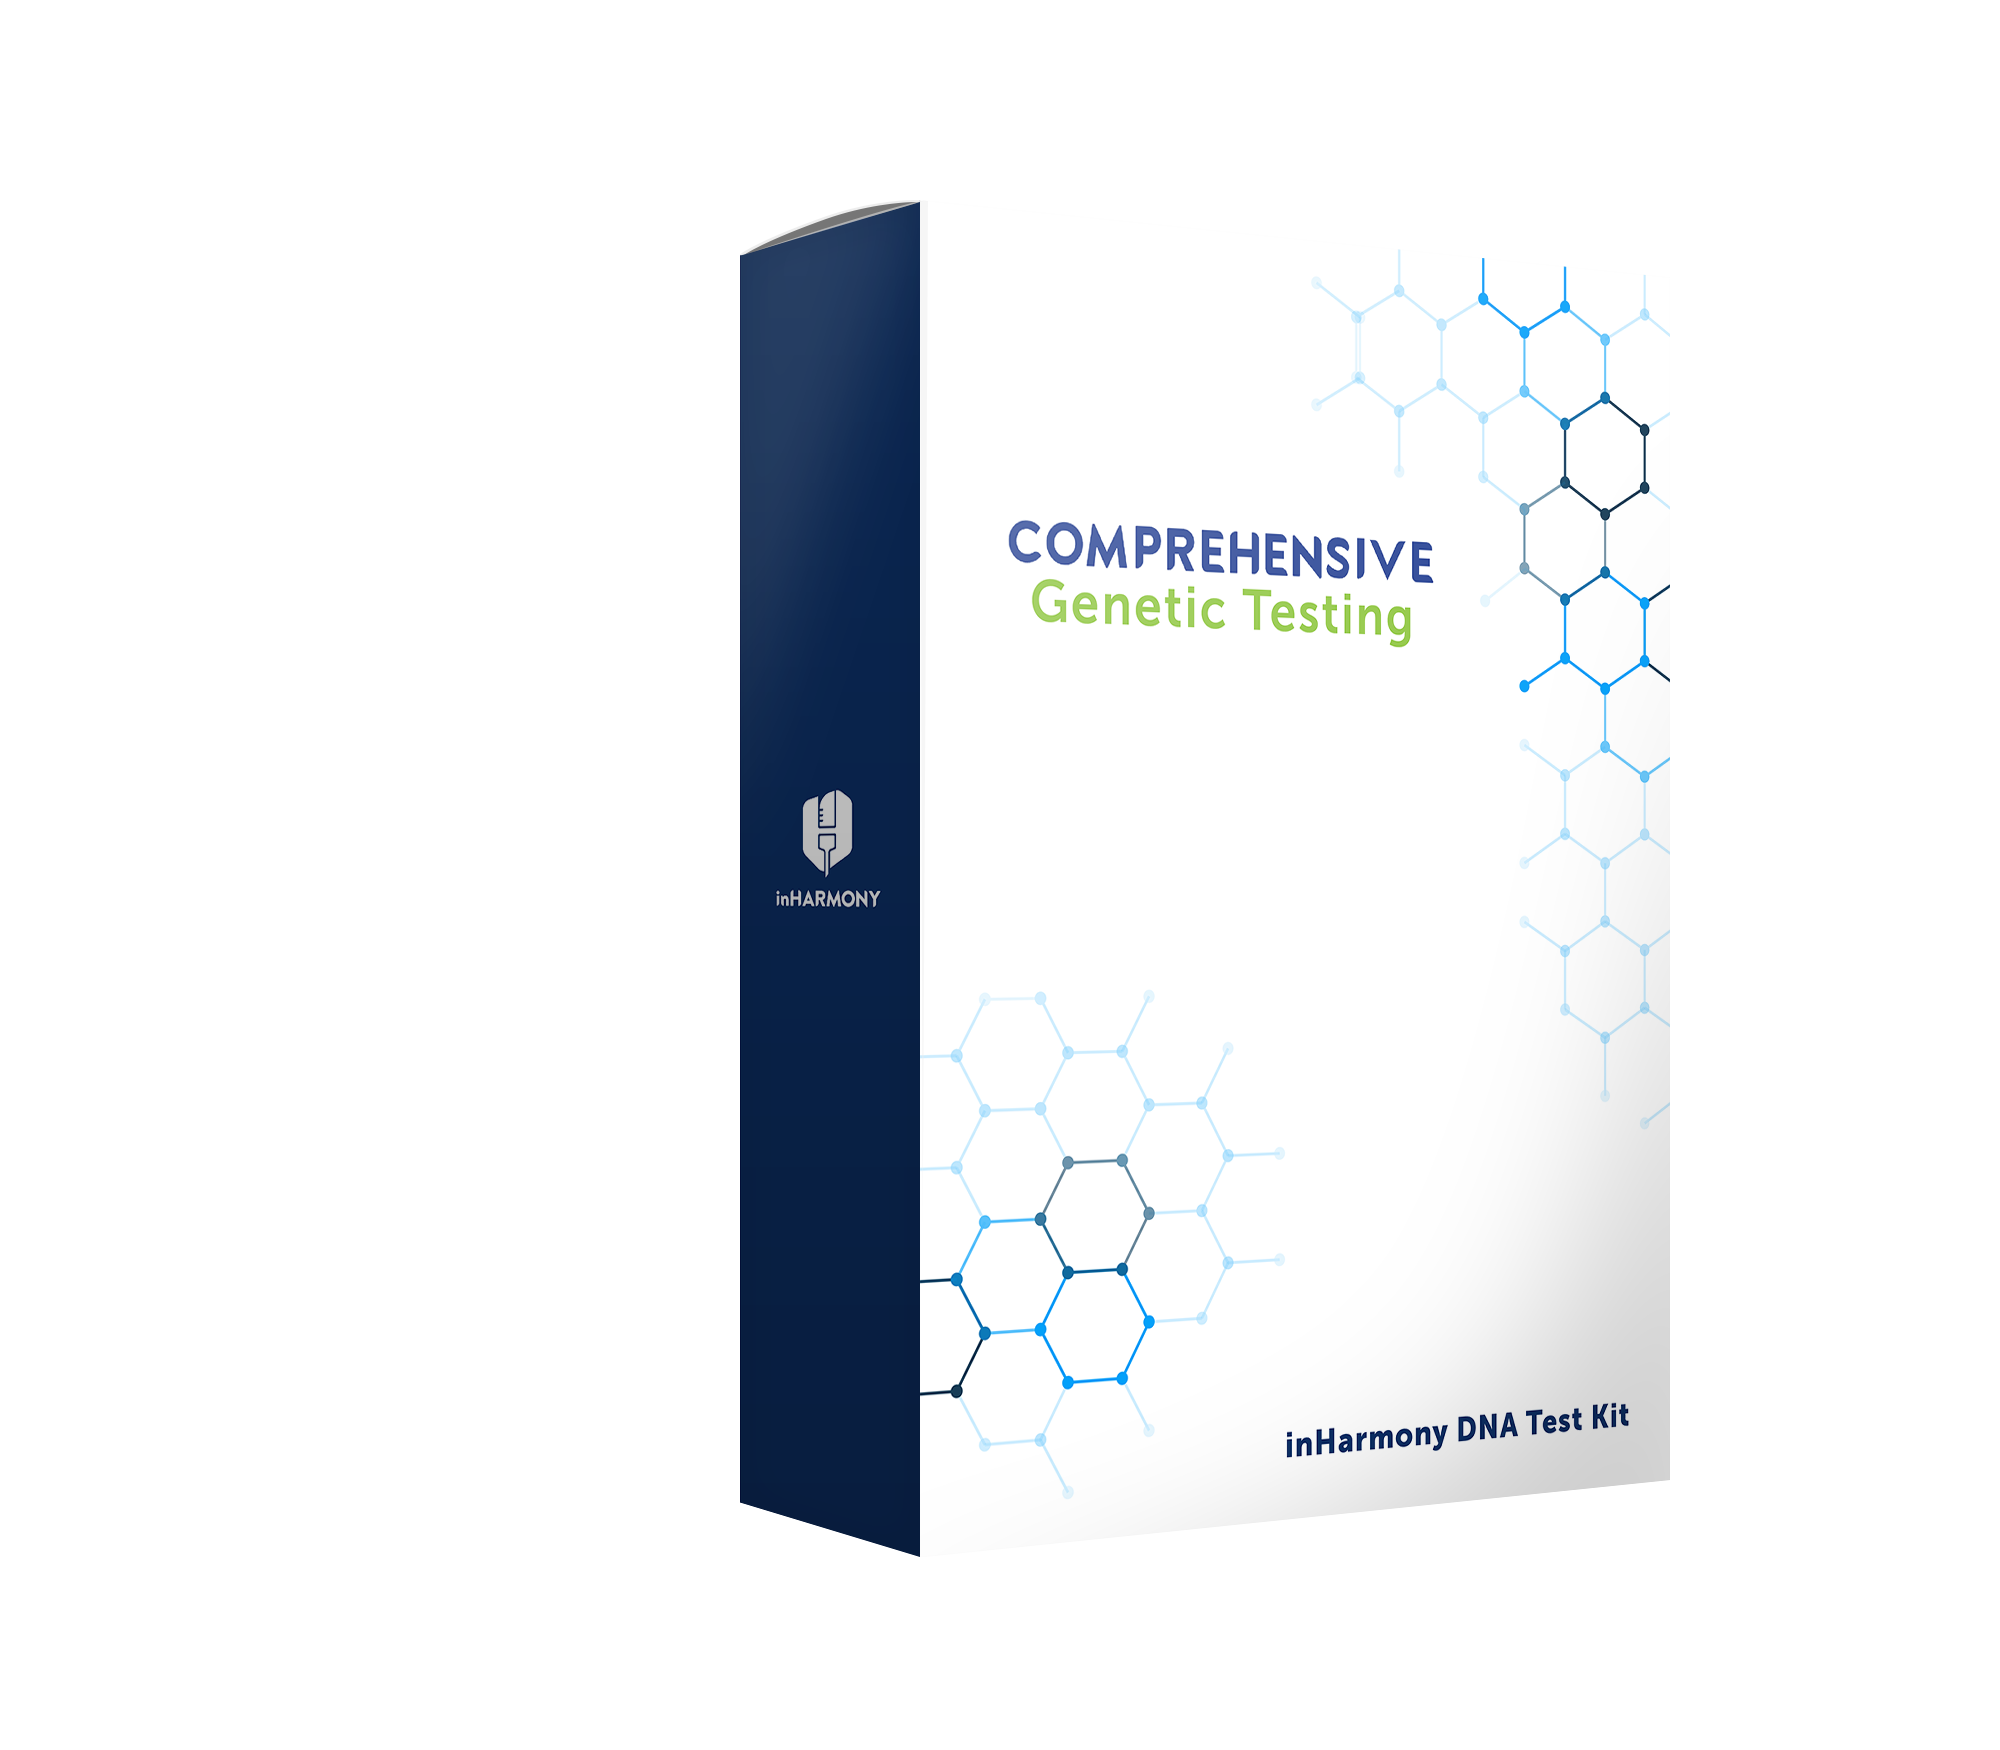 Product image of Complrehensive Genetic Testing Kit from inHarmony Clinic, part of a program named Lifetime Wellness Journey by inHarmony Clinic